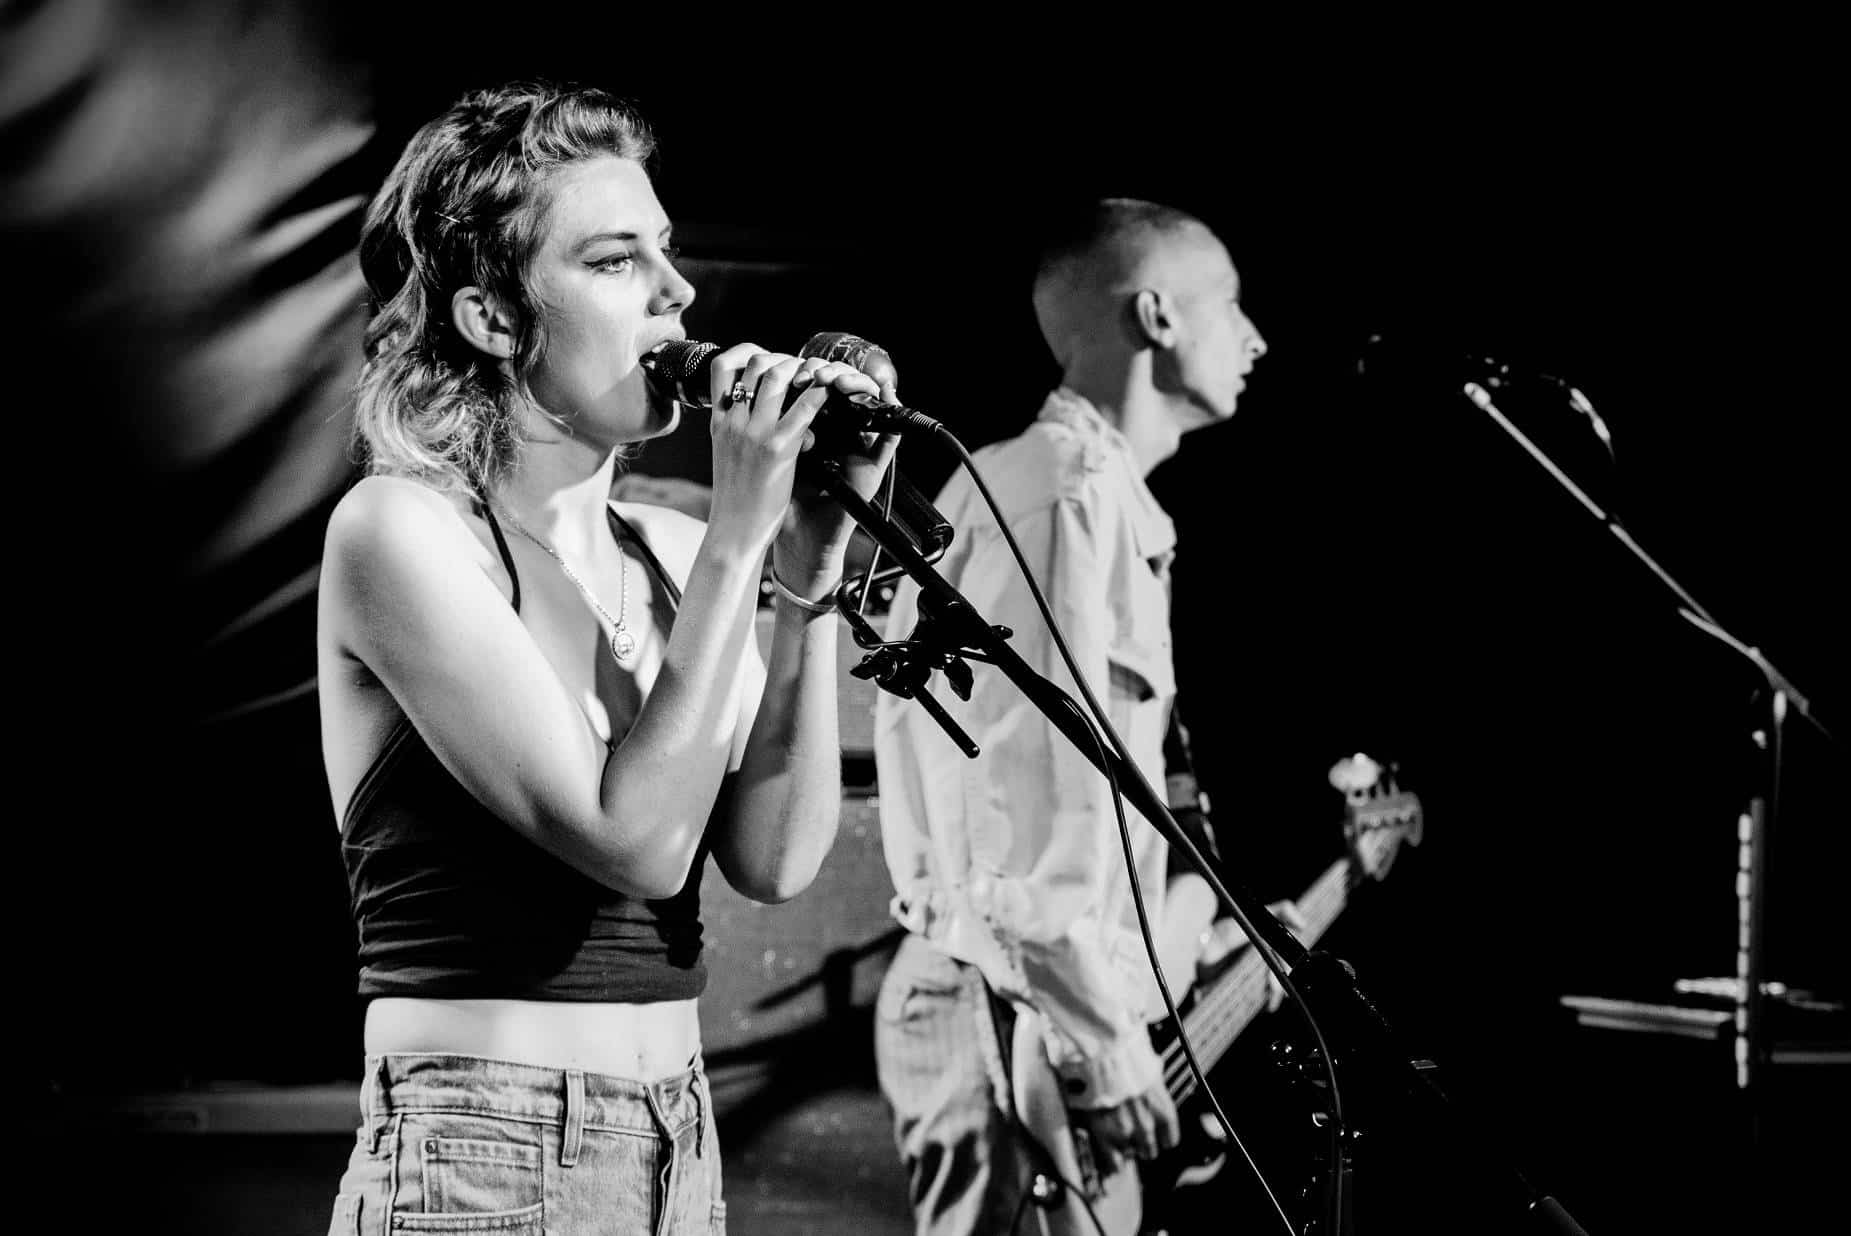 Wolf Alice make the walls sweat in an explosive sell-out show at The Forum